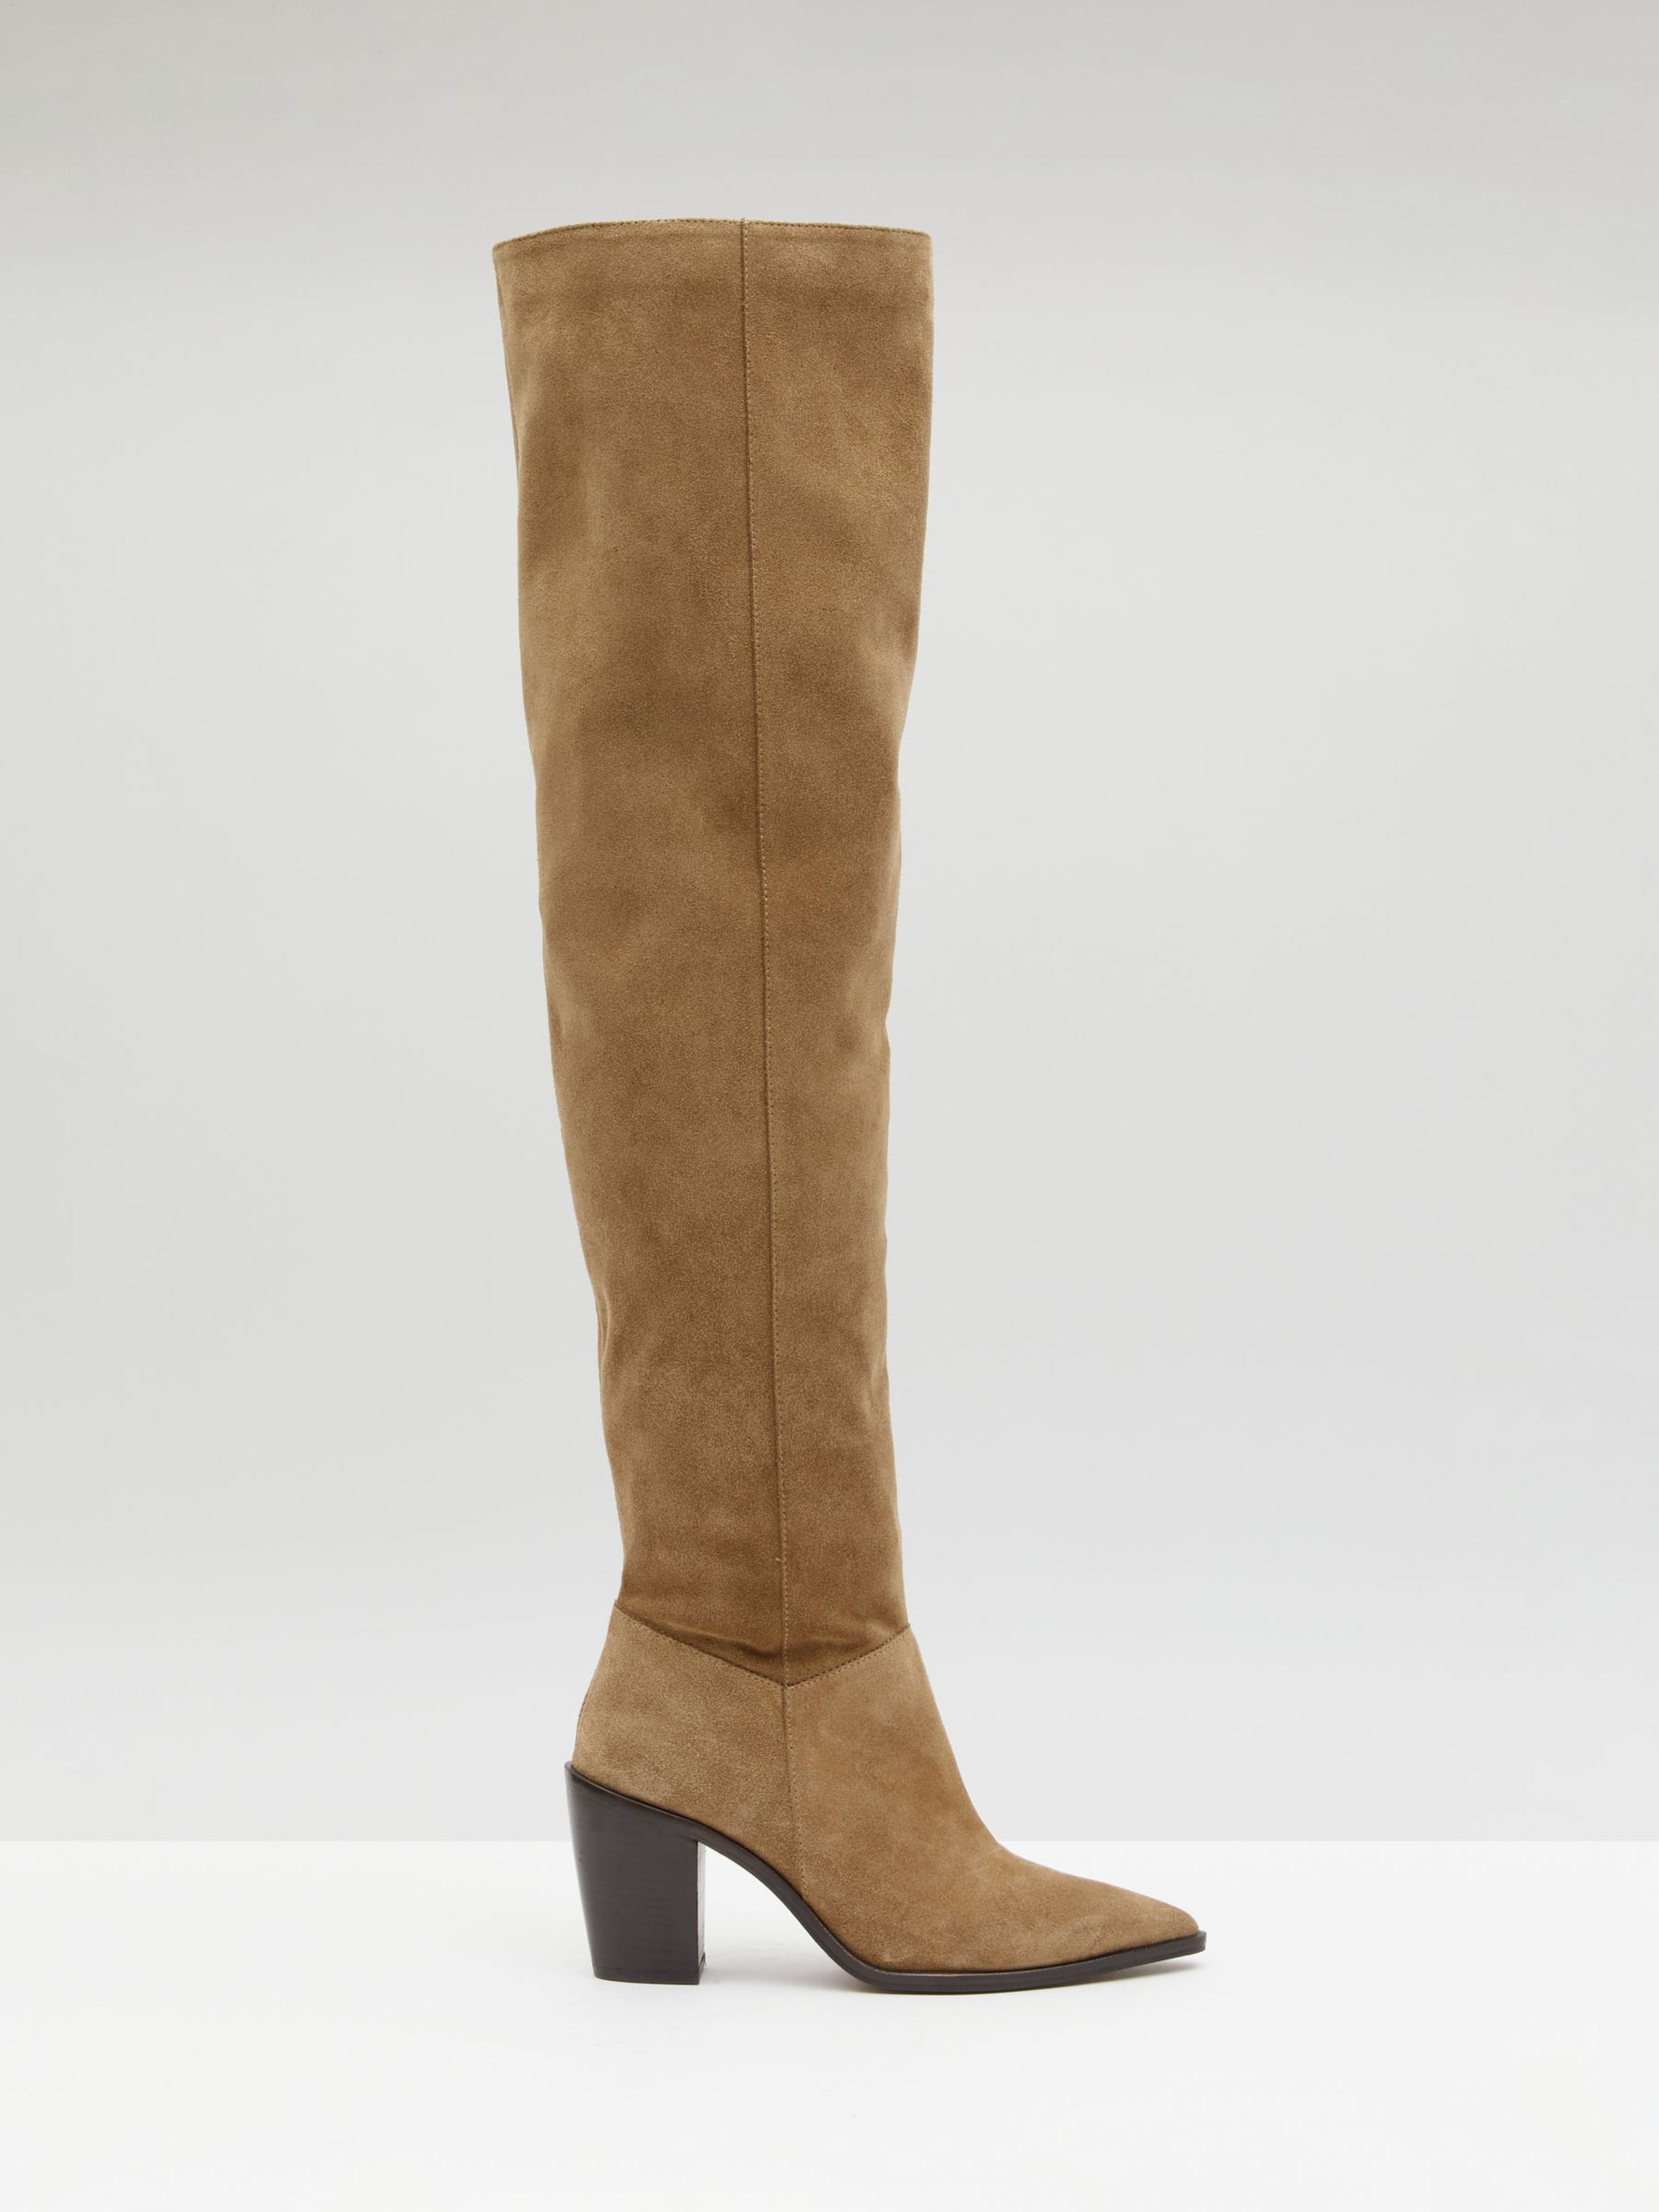 HUSH Elise Leather Over The Knee Boots, Tan